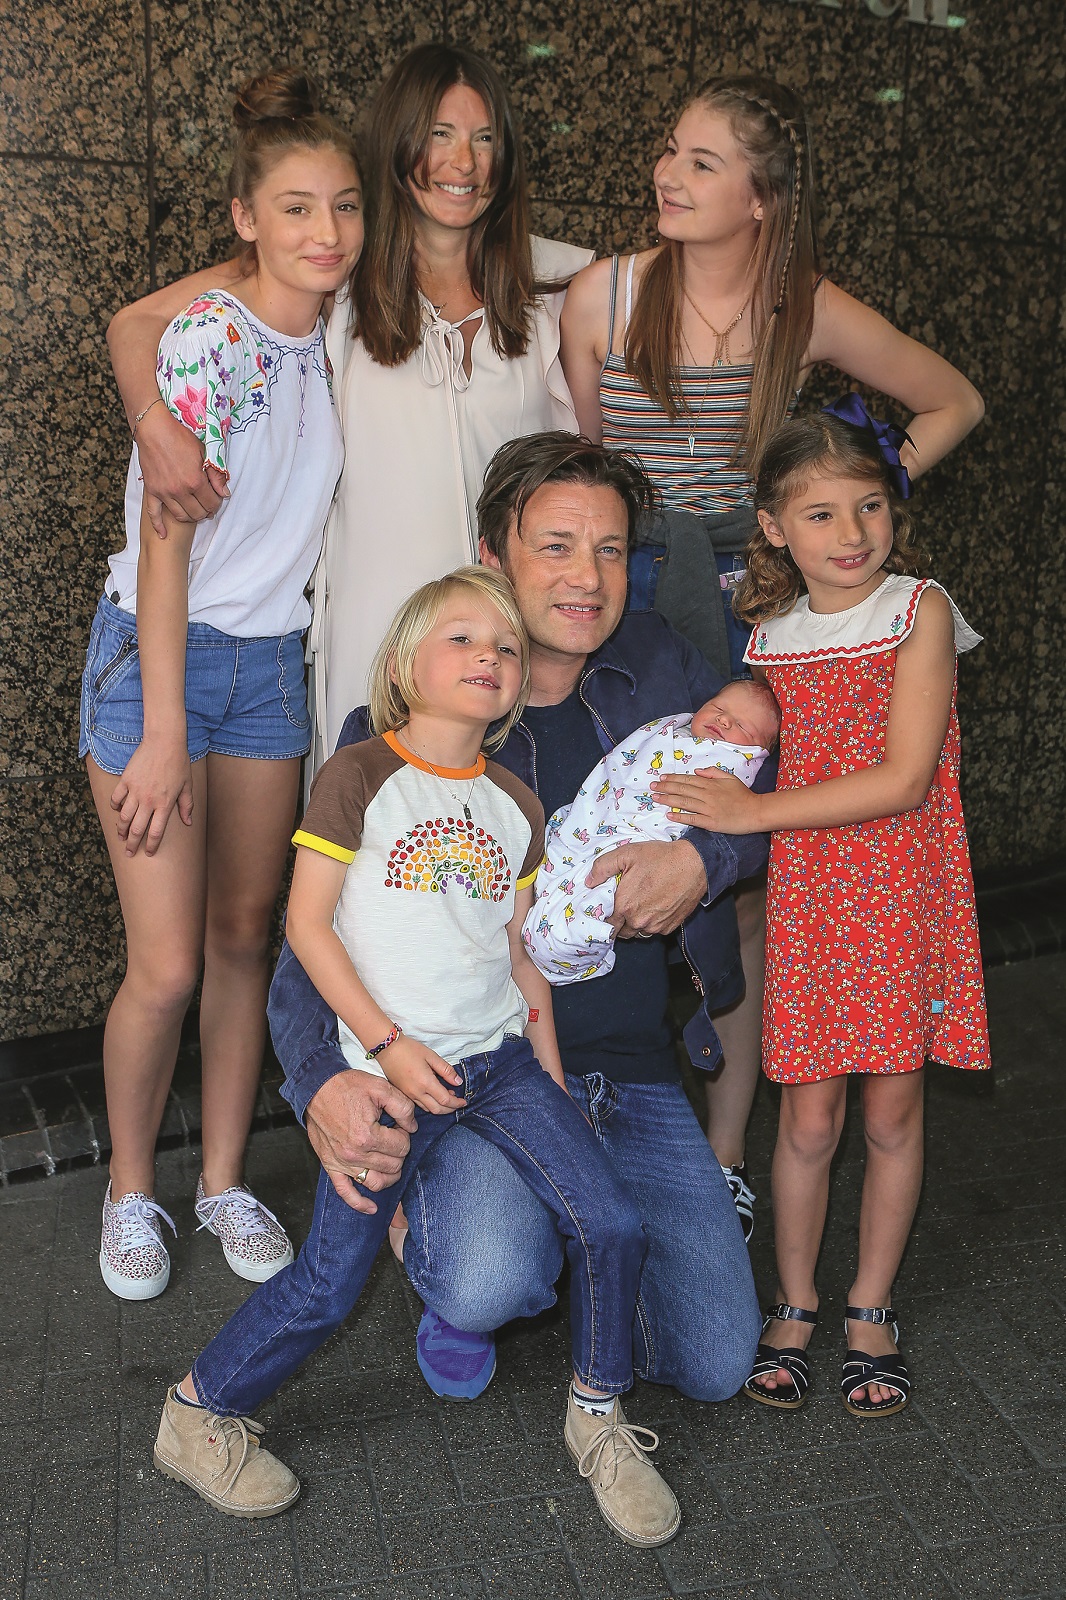 Jamie Oliver, Jools Oliver and their family  pose with their new baby at The Portland Street Hospital on August 8, 2016 in London, England.